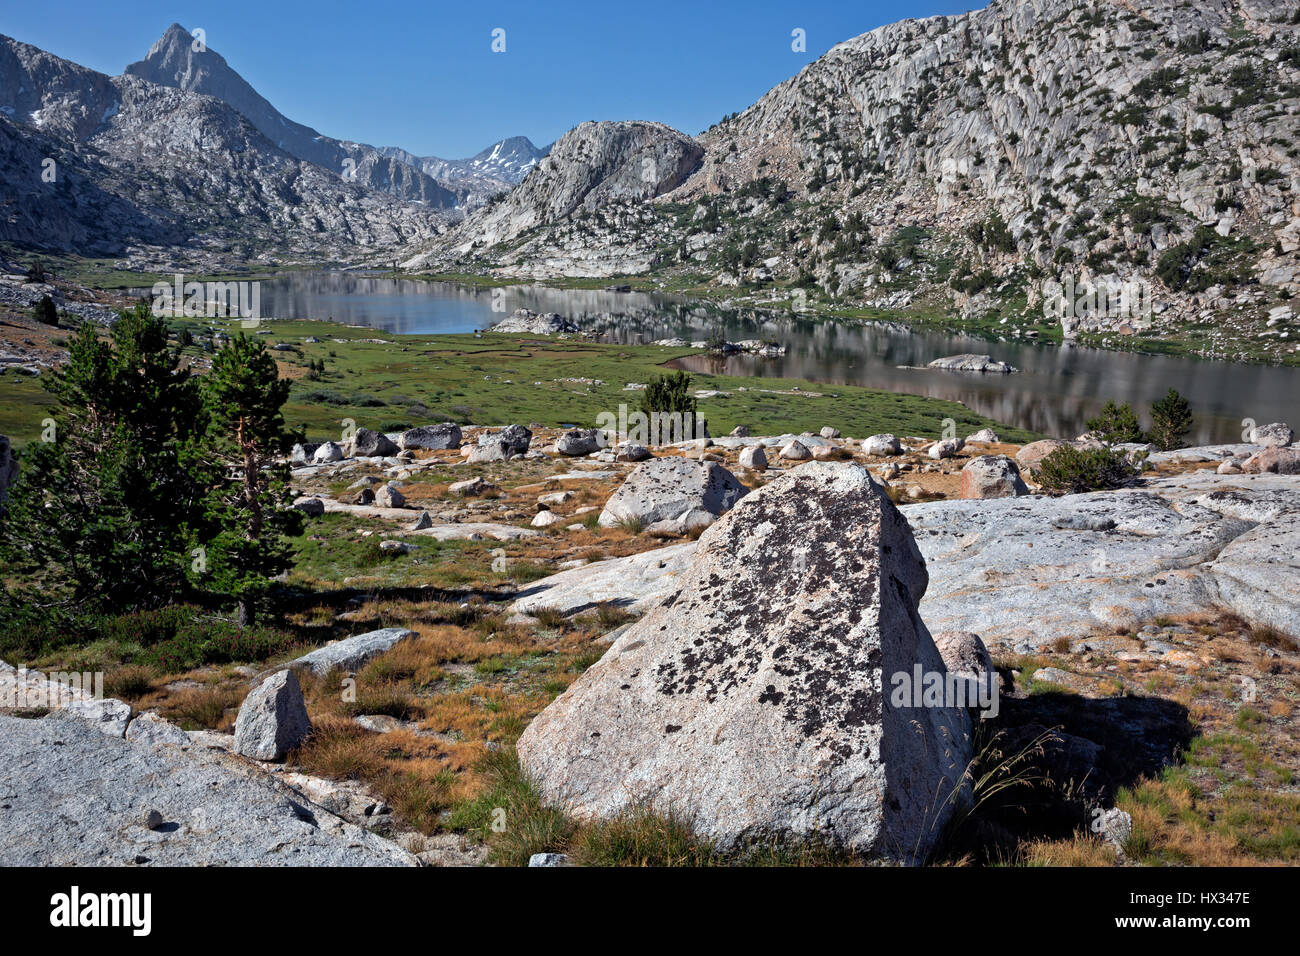 CA03115-00...CALIFORNIA - Evolution Lake located along the JMT/PCT in Kings Canyon National Park. Stock Photo